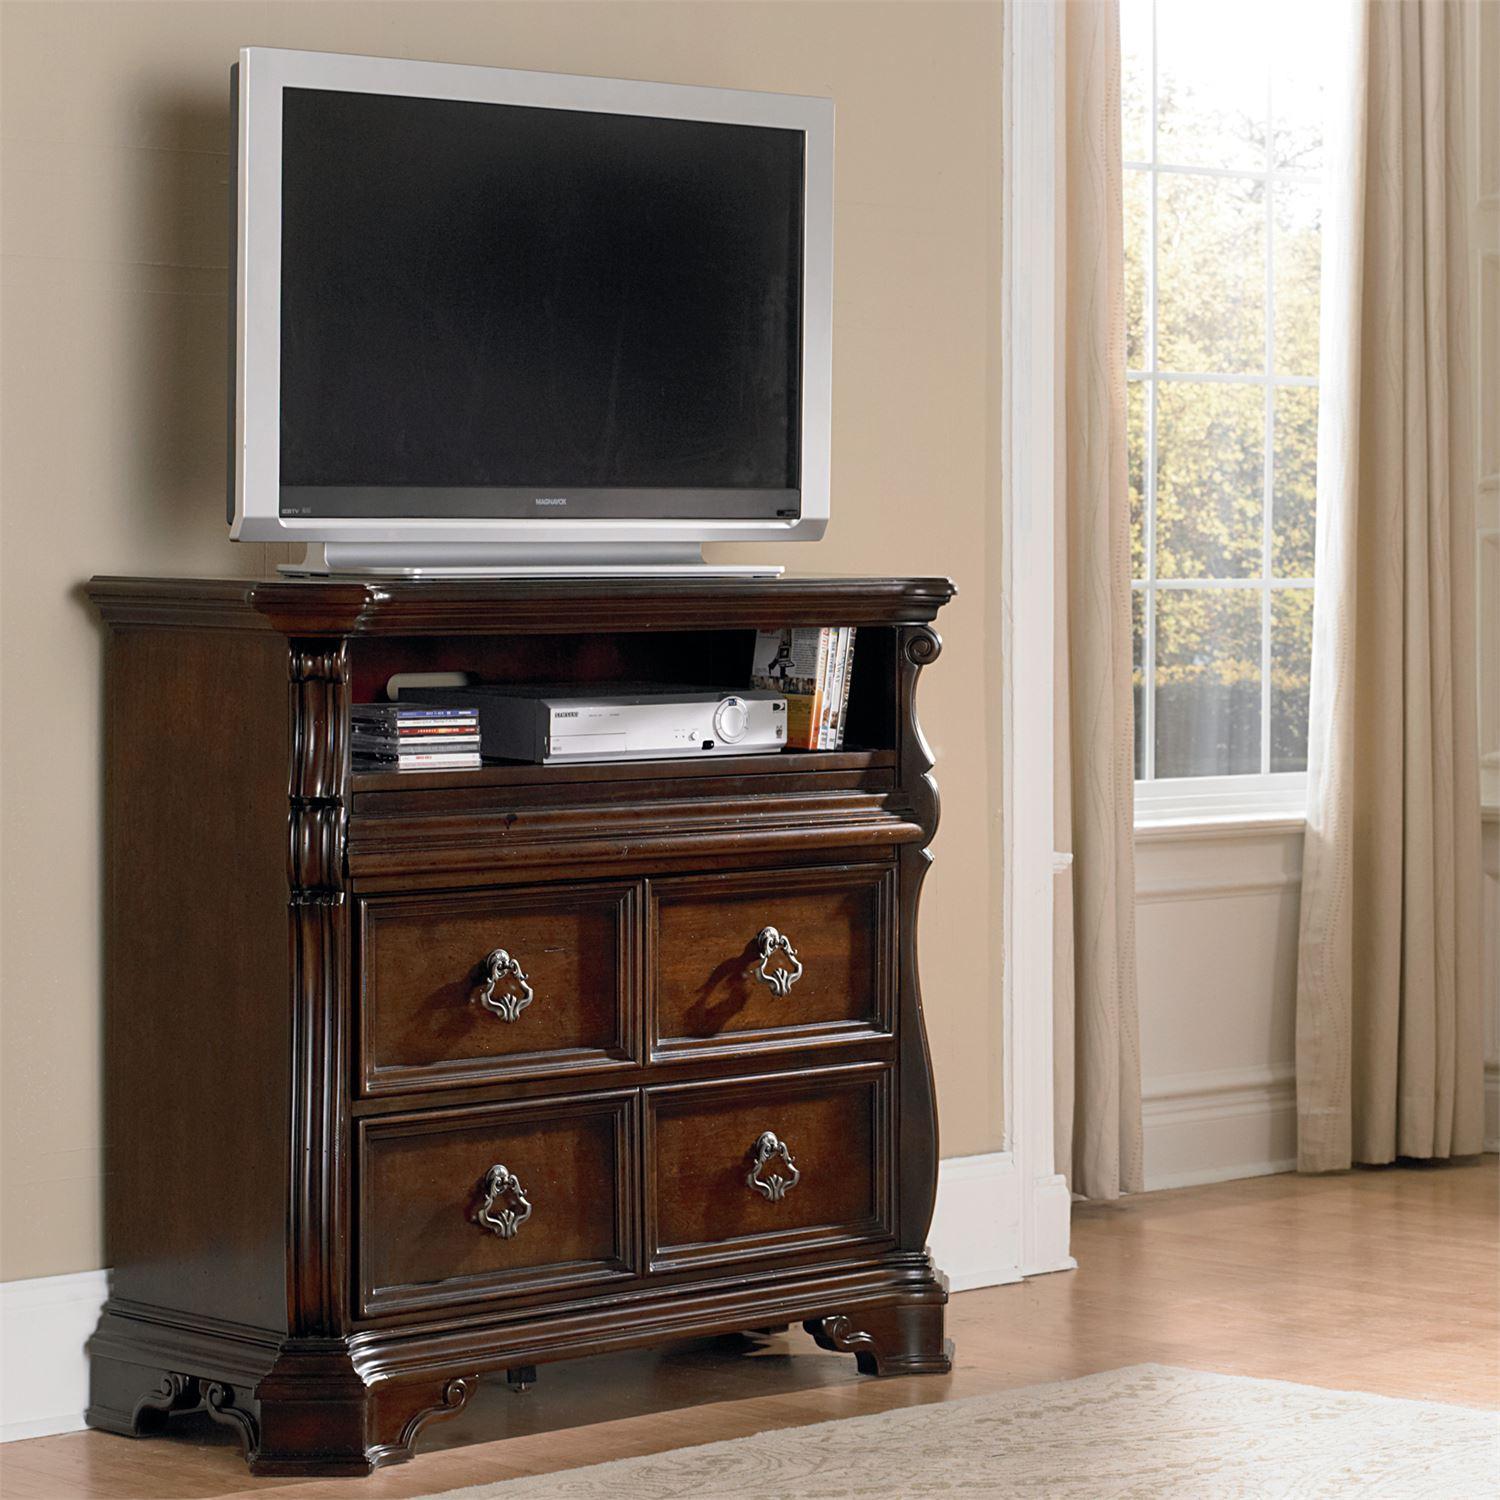 European Traditional Media Chest Arbor Place  (575-BR) Media Chest 575-BR45 in Brown 